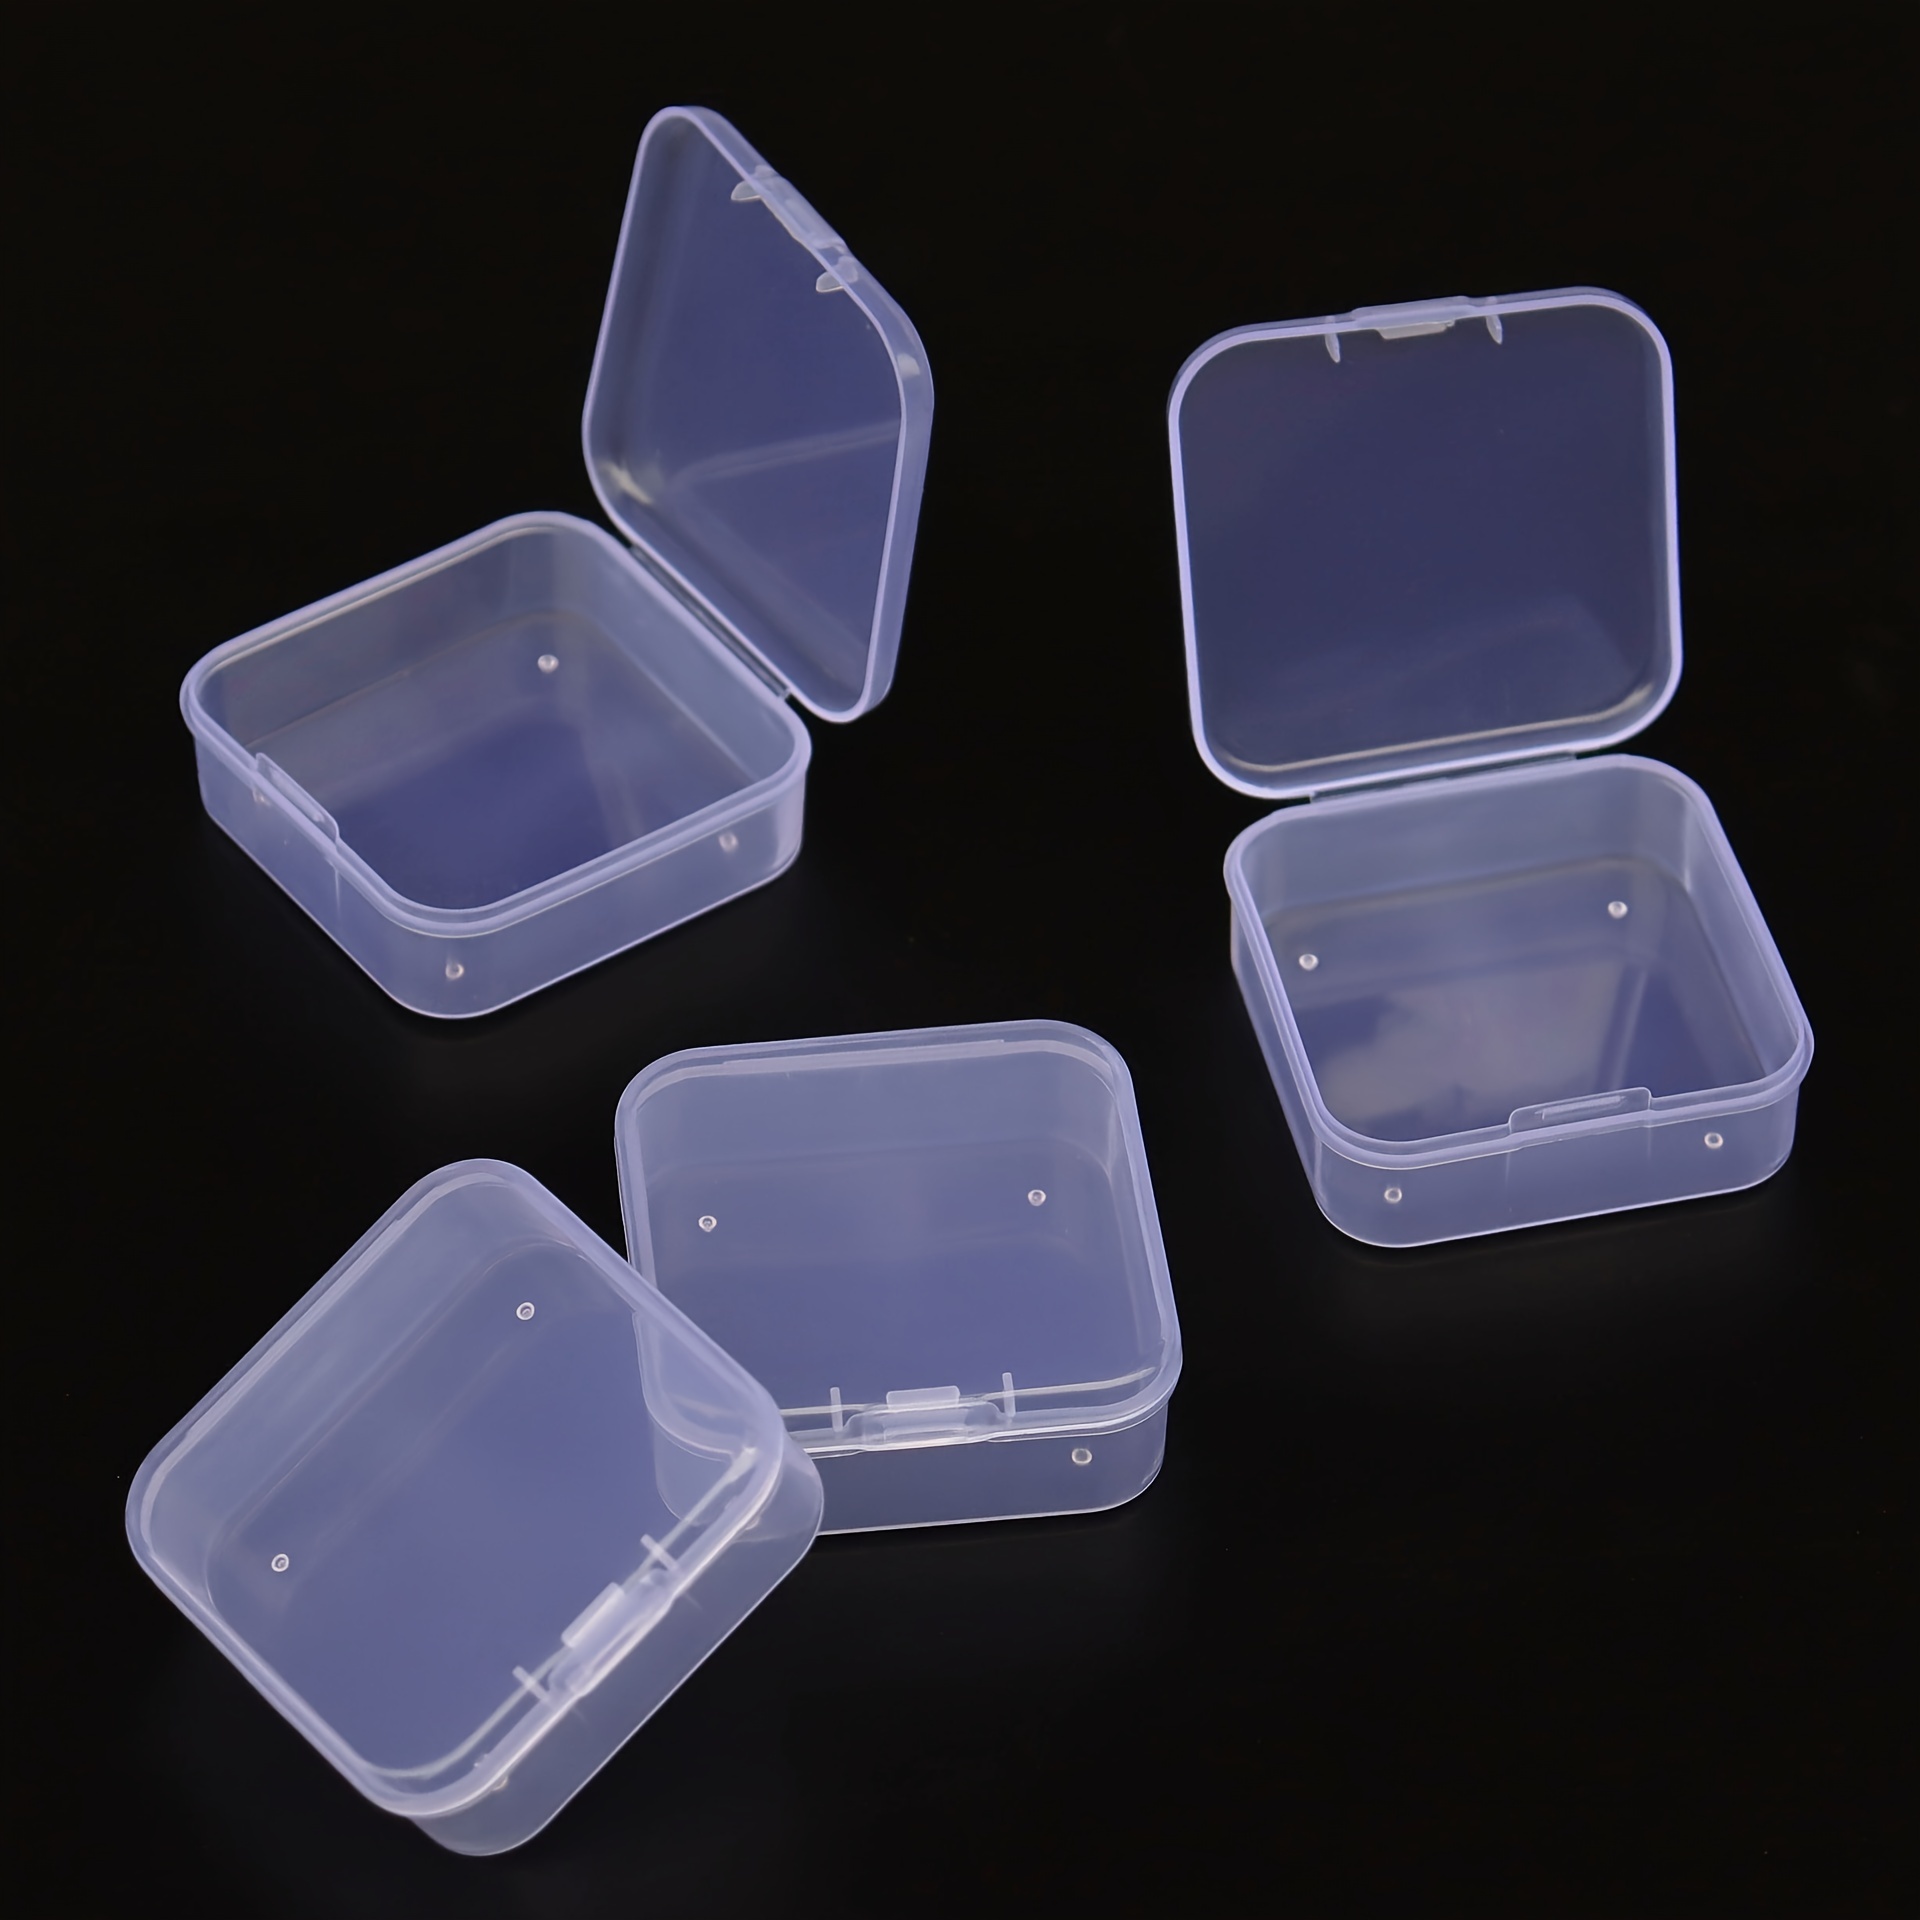 10 PCS set Contemporary Square Transparent Plastic Pp Storage Box For Earplugs Jewelry Hardware Or Other Small Crafts